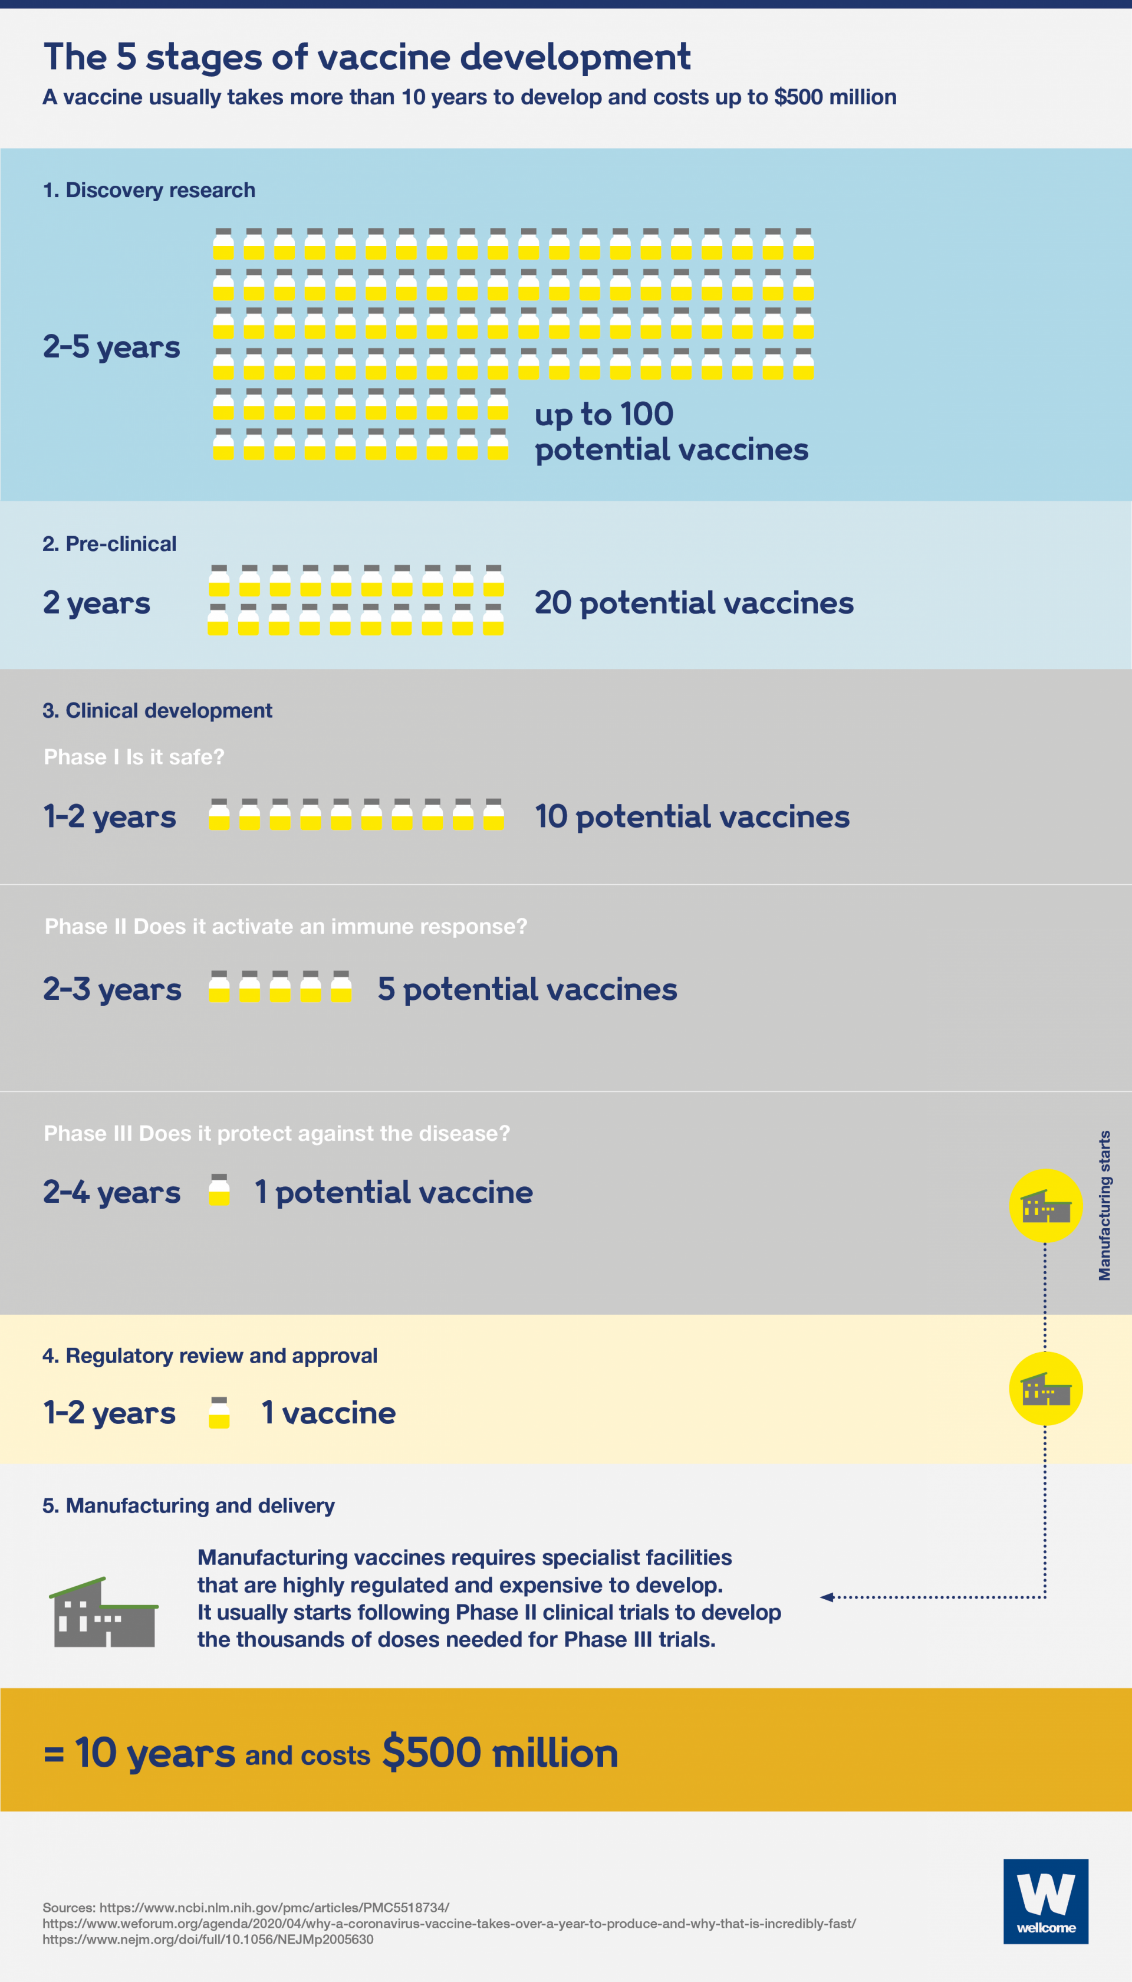 A chart by the health research organization Wellcome depicting the five stages of vaccine development: discovery research, pre-clinical, clinical development, regulatory review and approval, and manufacturing and delivery.